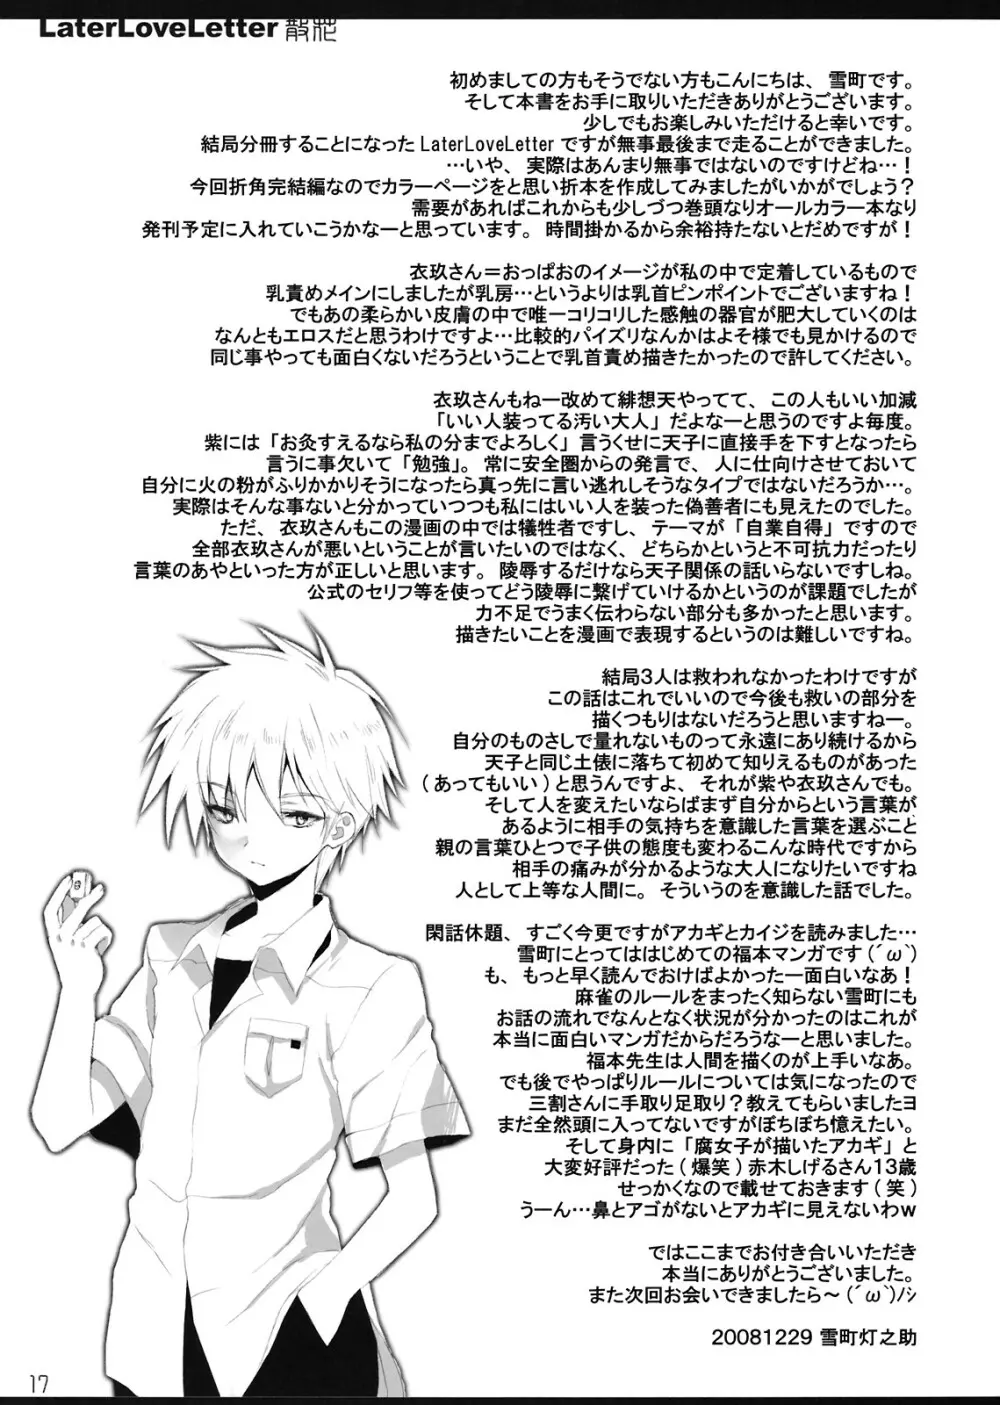 Later Love Letter 散花 Page.16